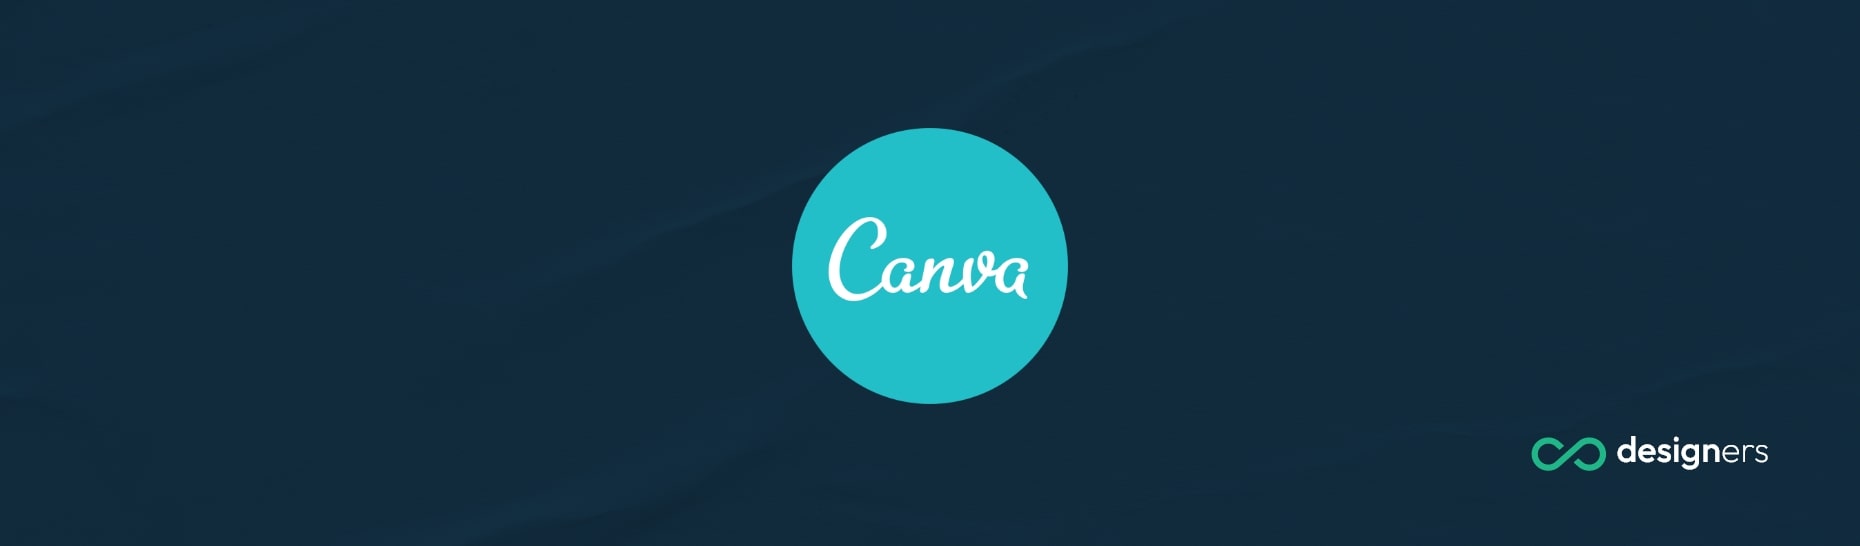 Does Canva Have a Teacher Discount?